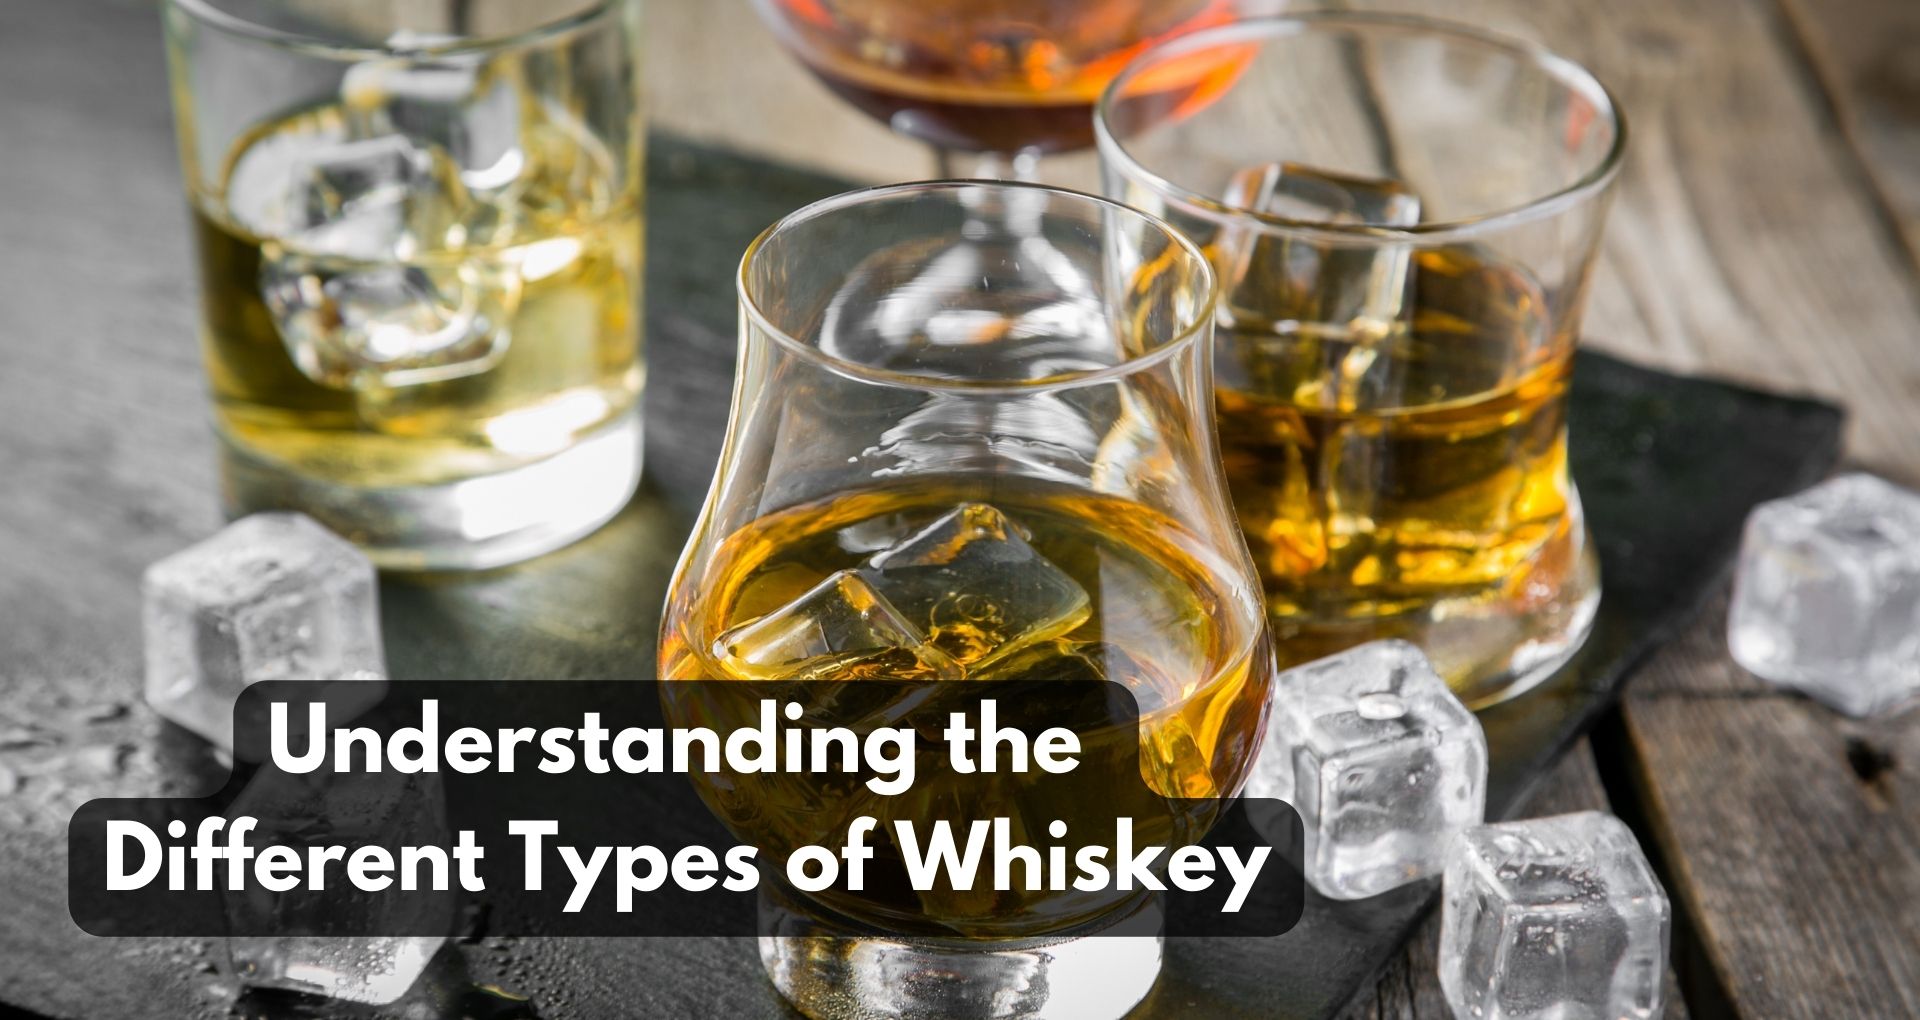 Understanding the Different Types of Whiskey